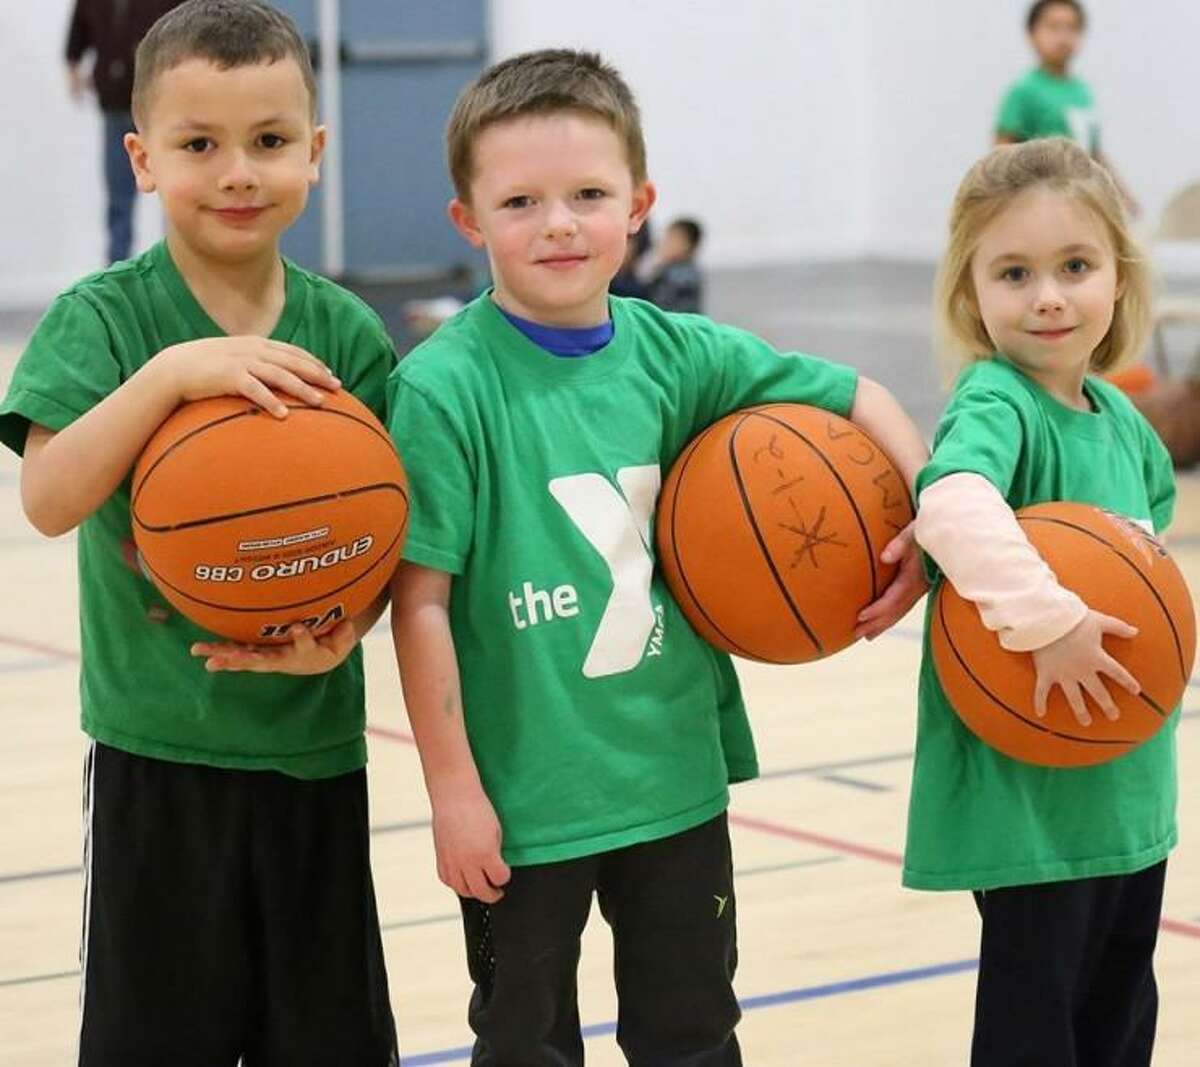 Dance, Tae Kwon Do, and basketball in youth sports are starting at the Regional YMCA of Western Connecticut on Tuesday, September 6. The Regional YMCA has a Greenknoll Branch at 2 Huckleberry Hill Road in Brookfield.